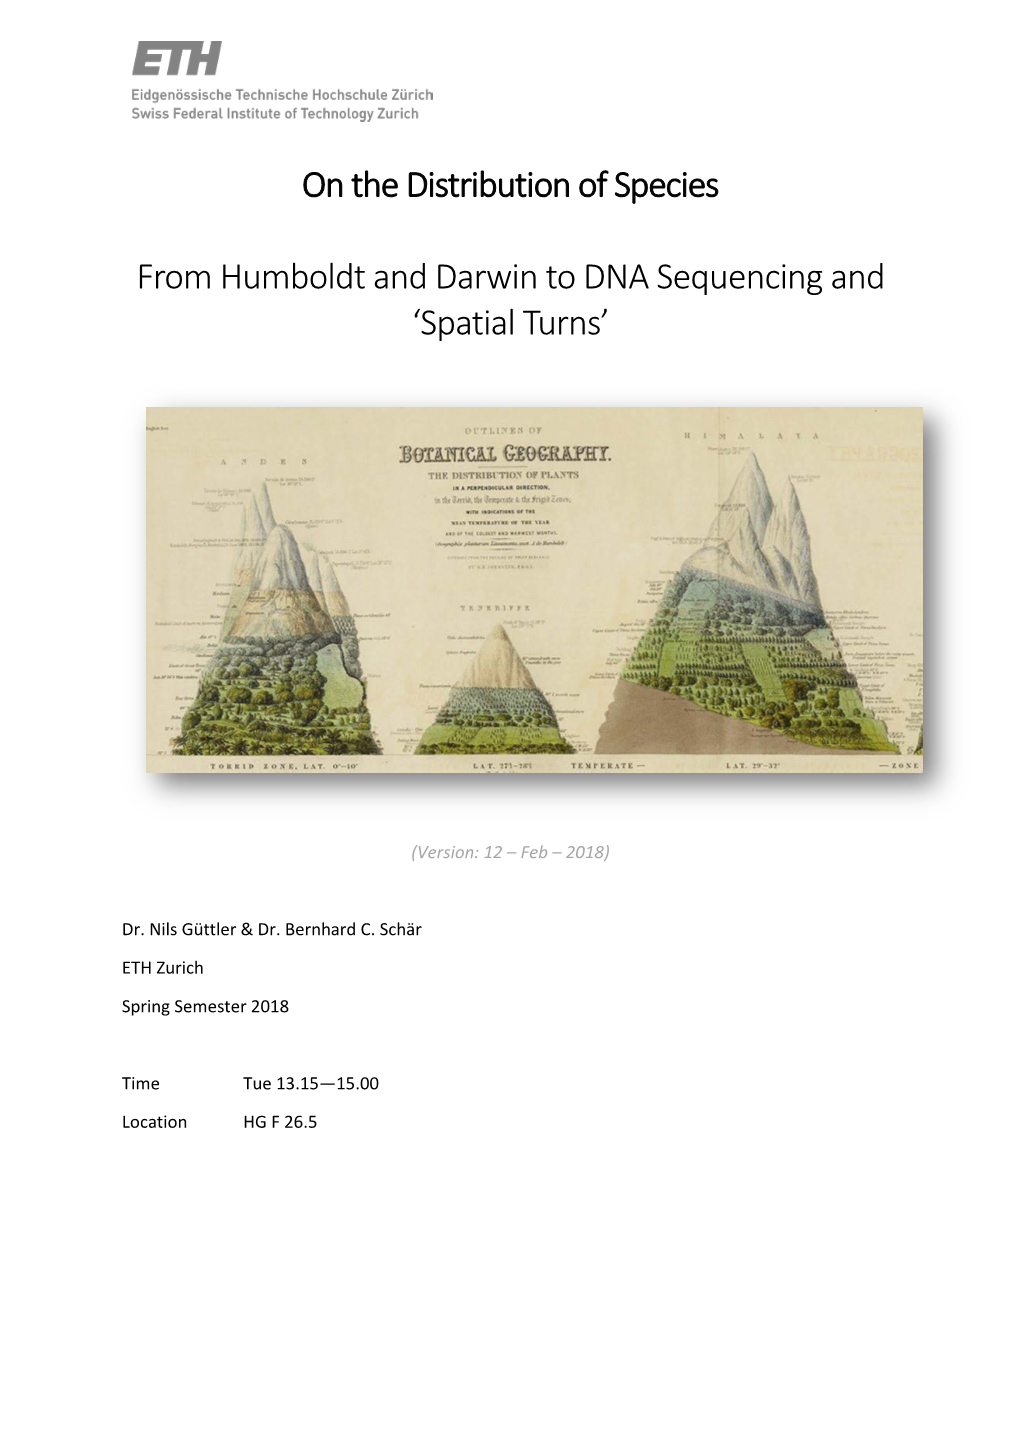 On the Distribution of Species from Humboldt and Darwin to DNA